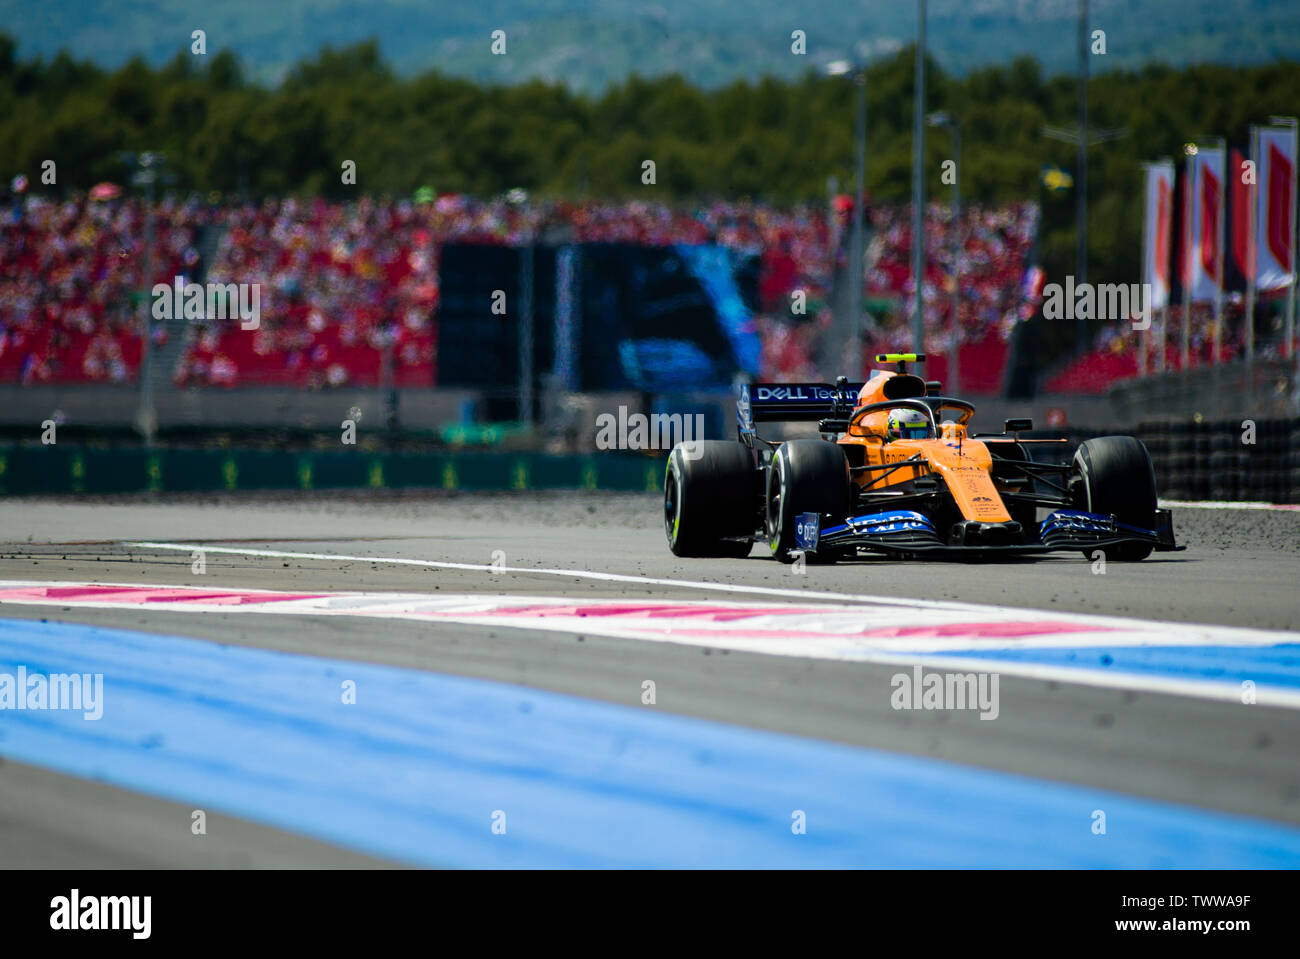 F1 2020 My Driver Career - Sivu 4 23rd-june-2019-circuit-automobile-paul-ricard-le-castellet-marseille-france-fia-formula-1-grand-prix-of-france-race-day-lando-norris-of-the-mclaren-team-in-action-during-the-french-grand-prix-pablo-guillenalamy-TWWA9F